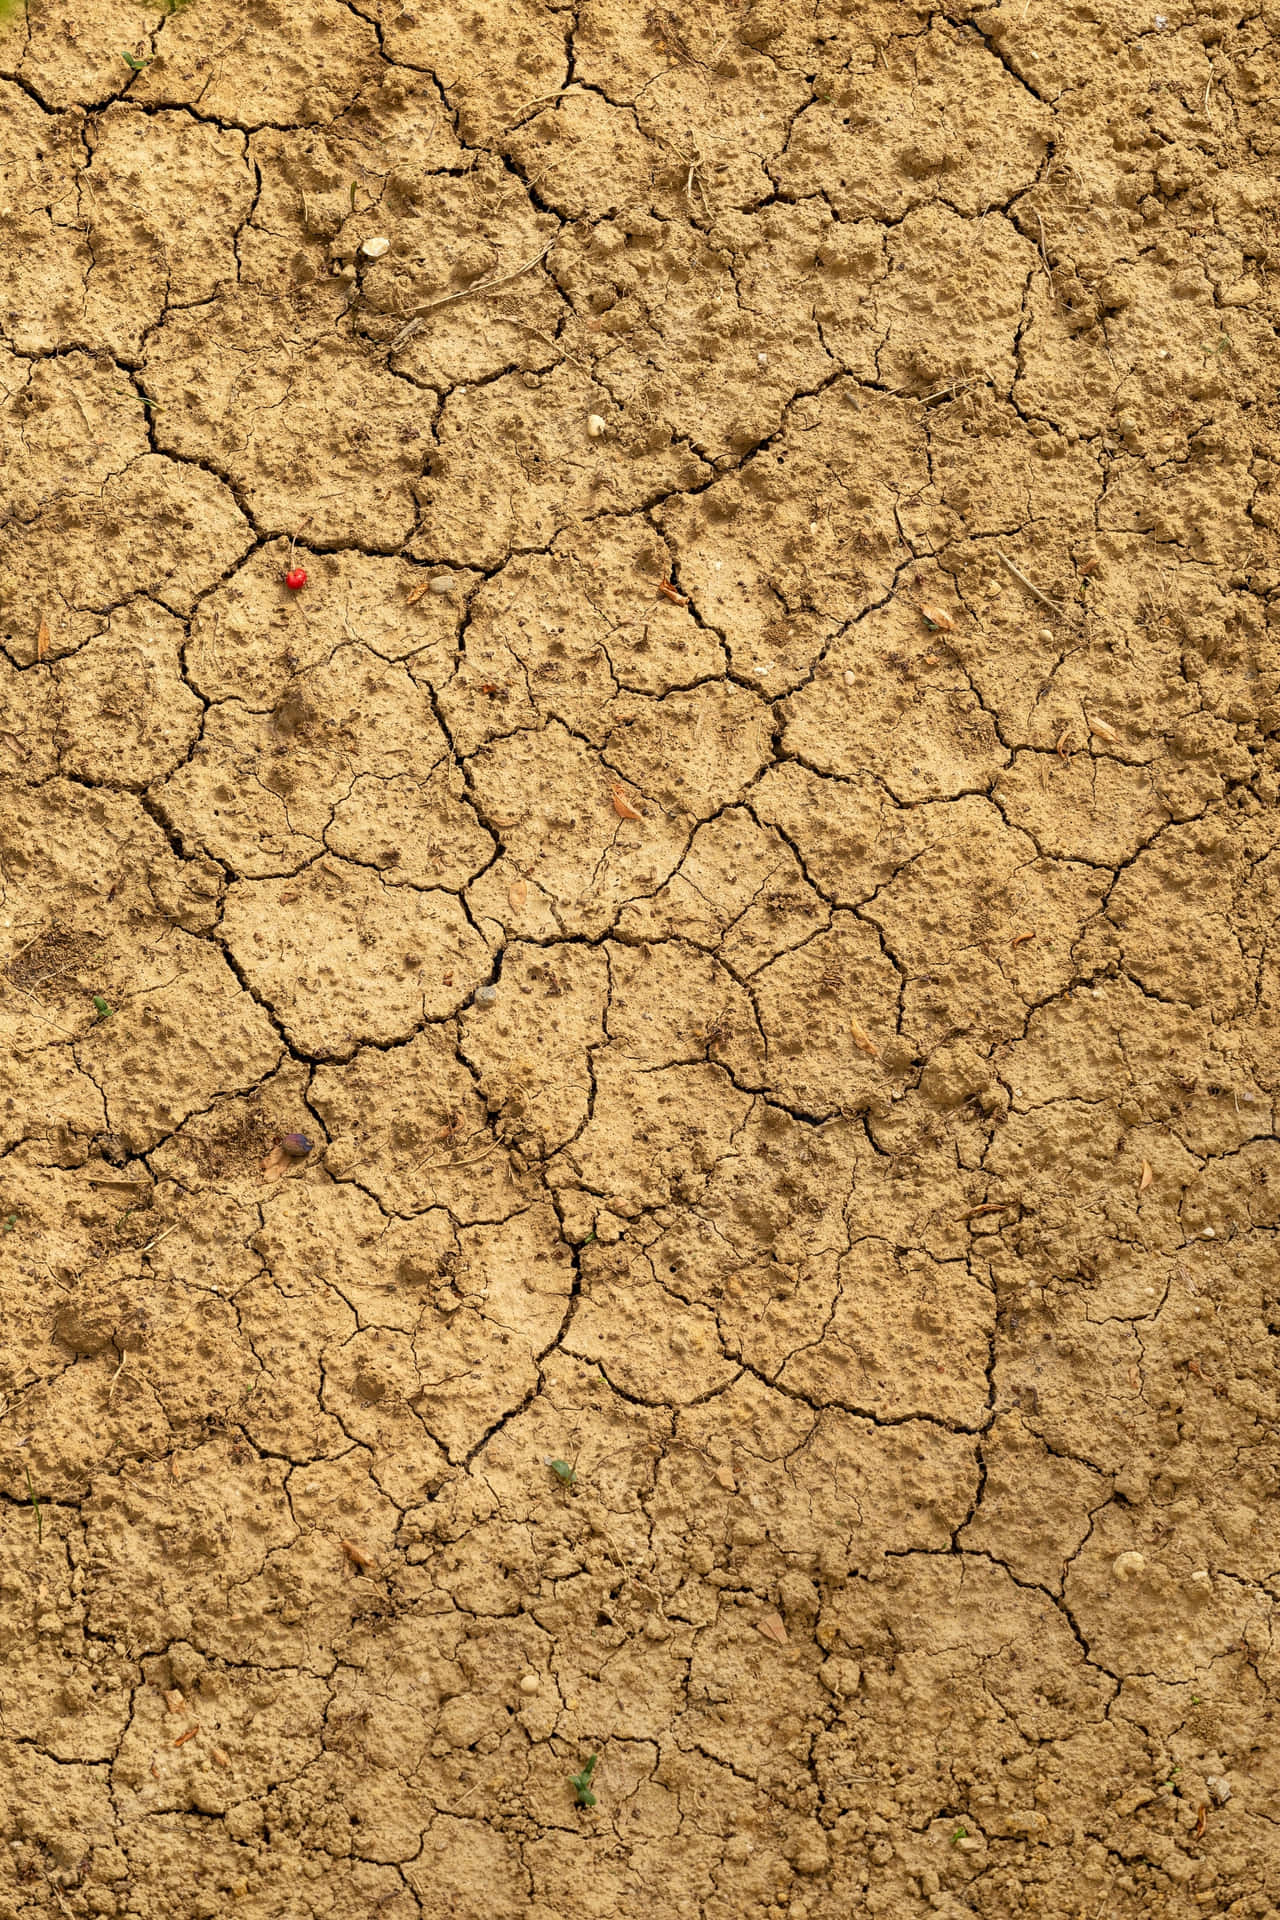 Cracked Dry Mud Soil Texture Wallpaper